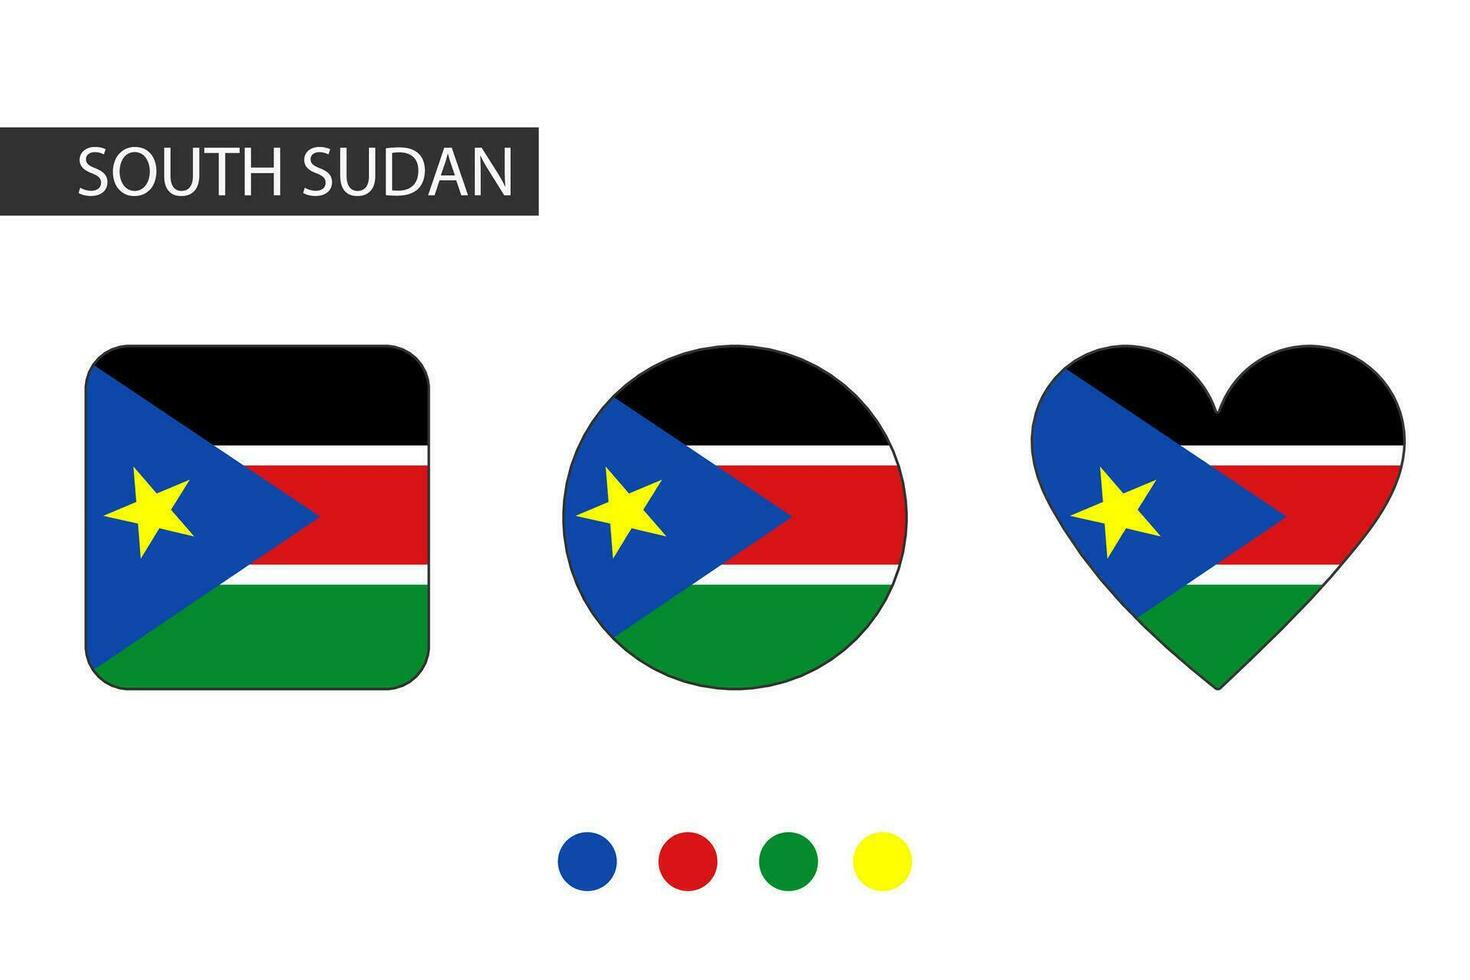 South Sudan 3 shapes square, circle, heart with city flag. Isolated on white background. vector